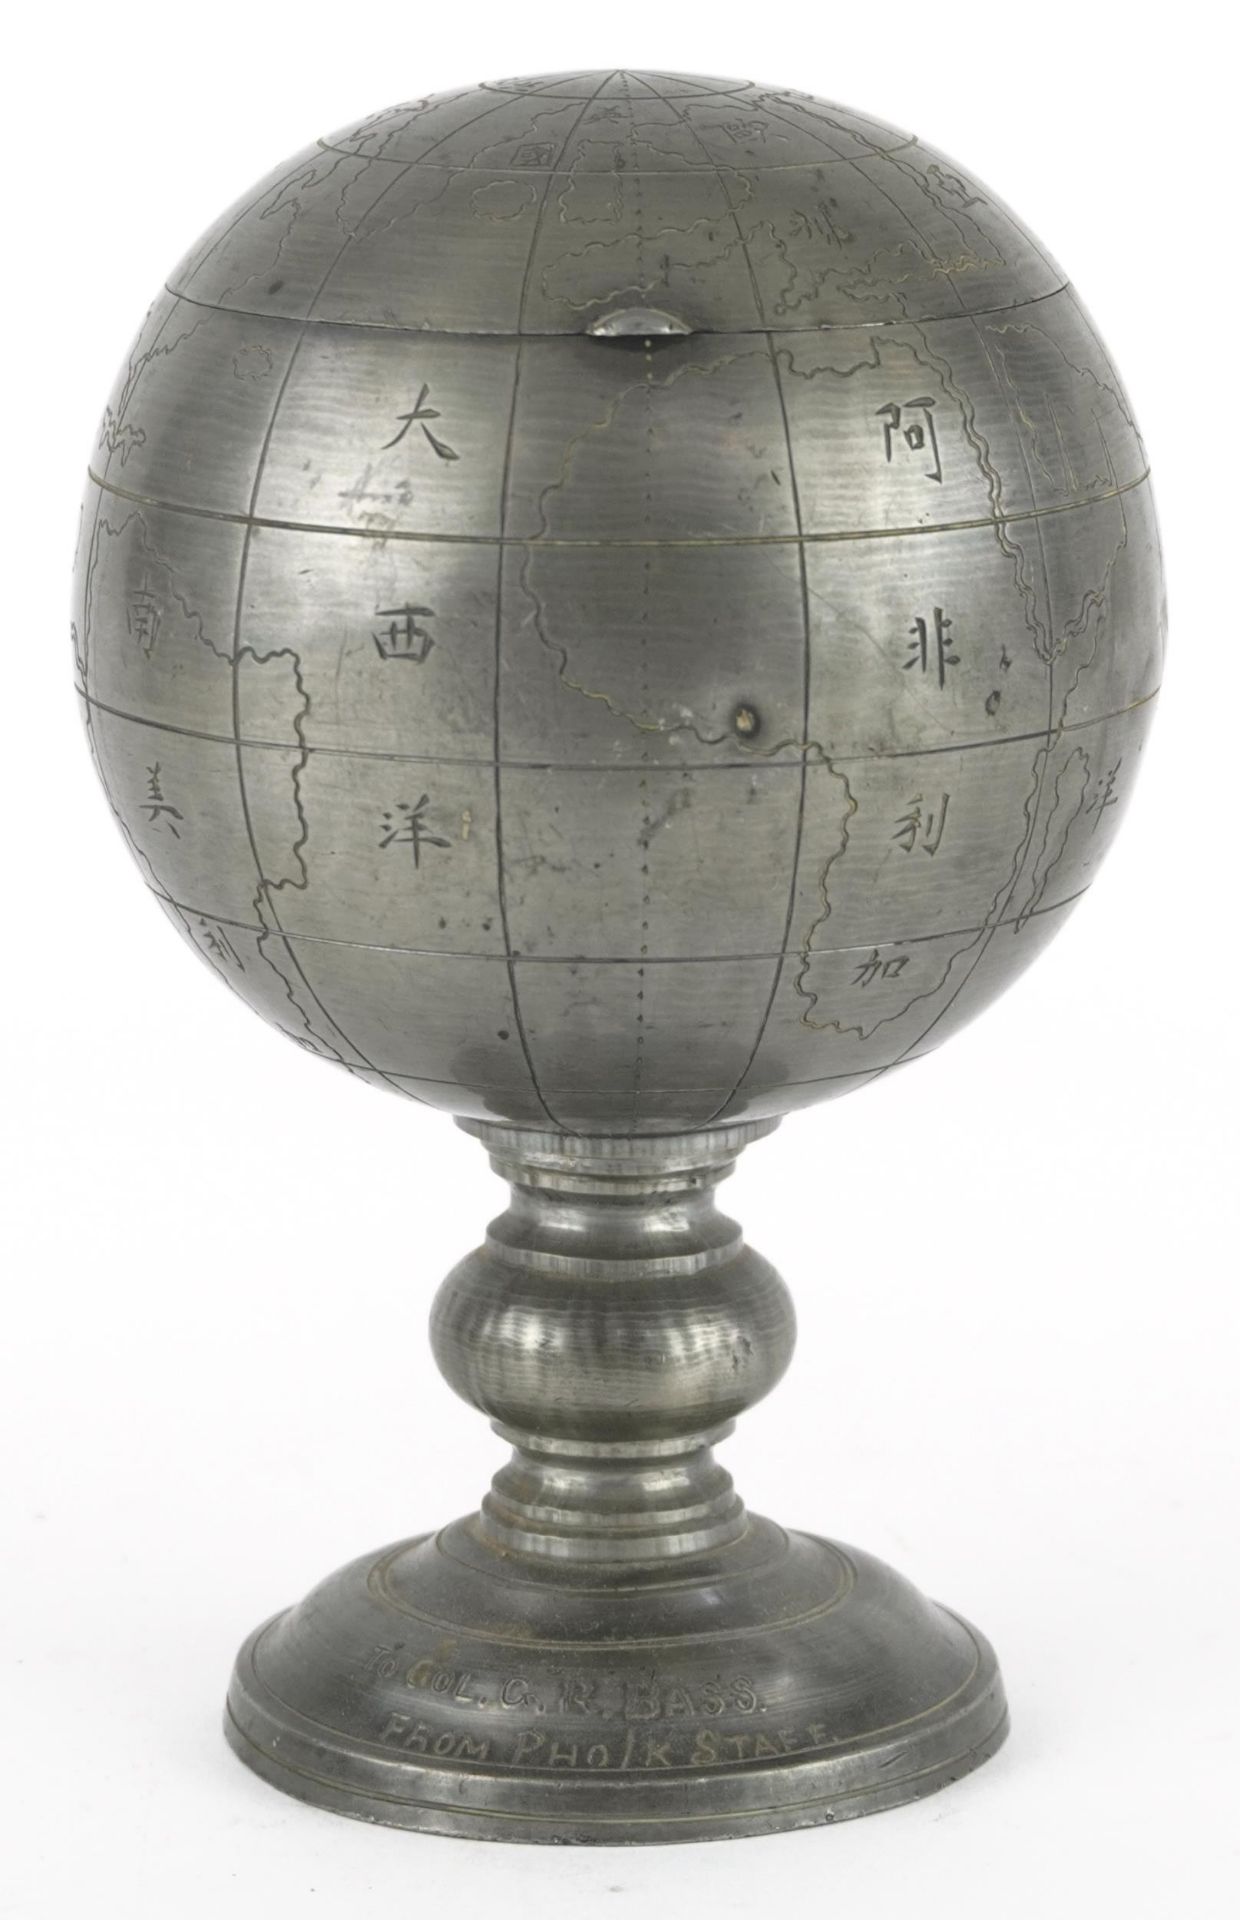 Military interest pewter globe inkwell to Colonel G R Bass from Pho/K staff incised with Chinese